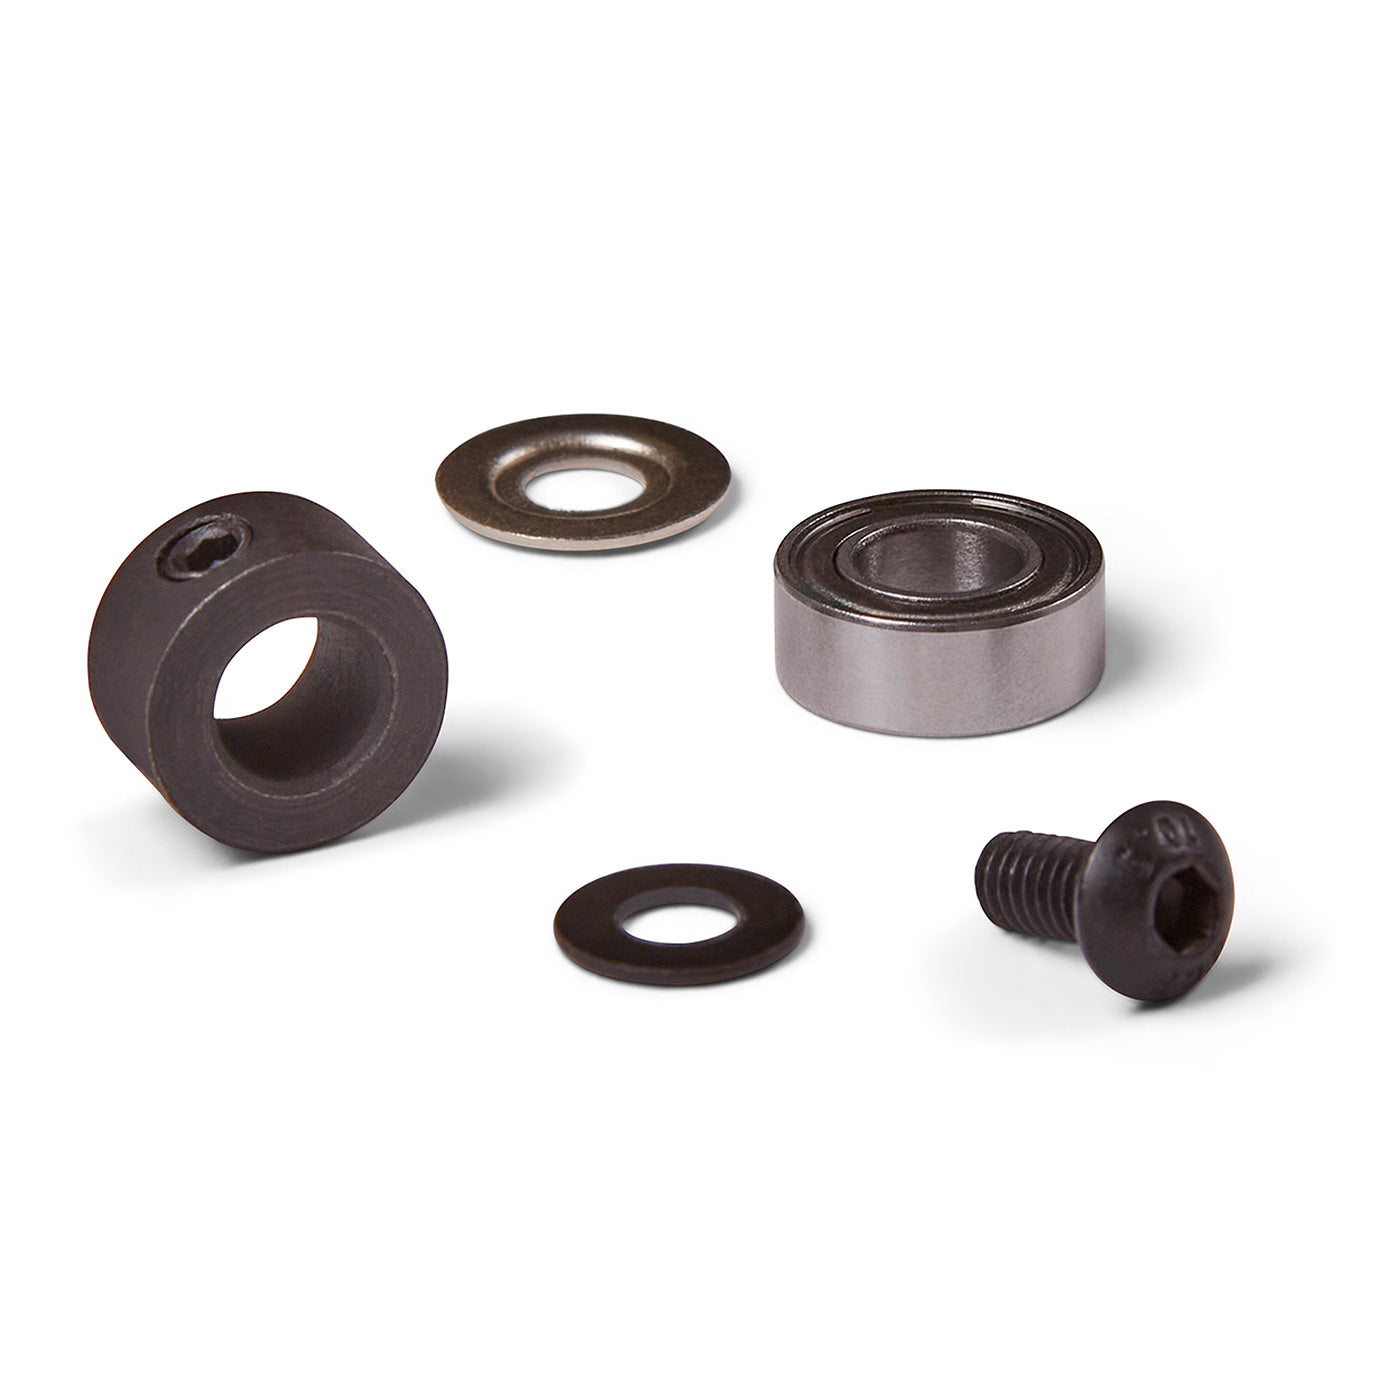 Bearing Kit for R5613, R5614 and R5615  